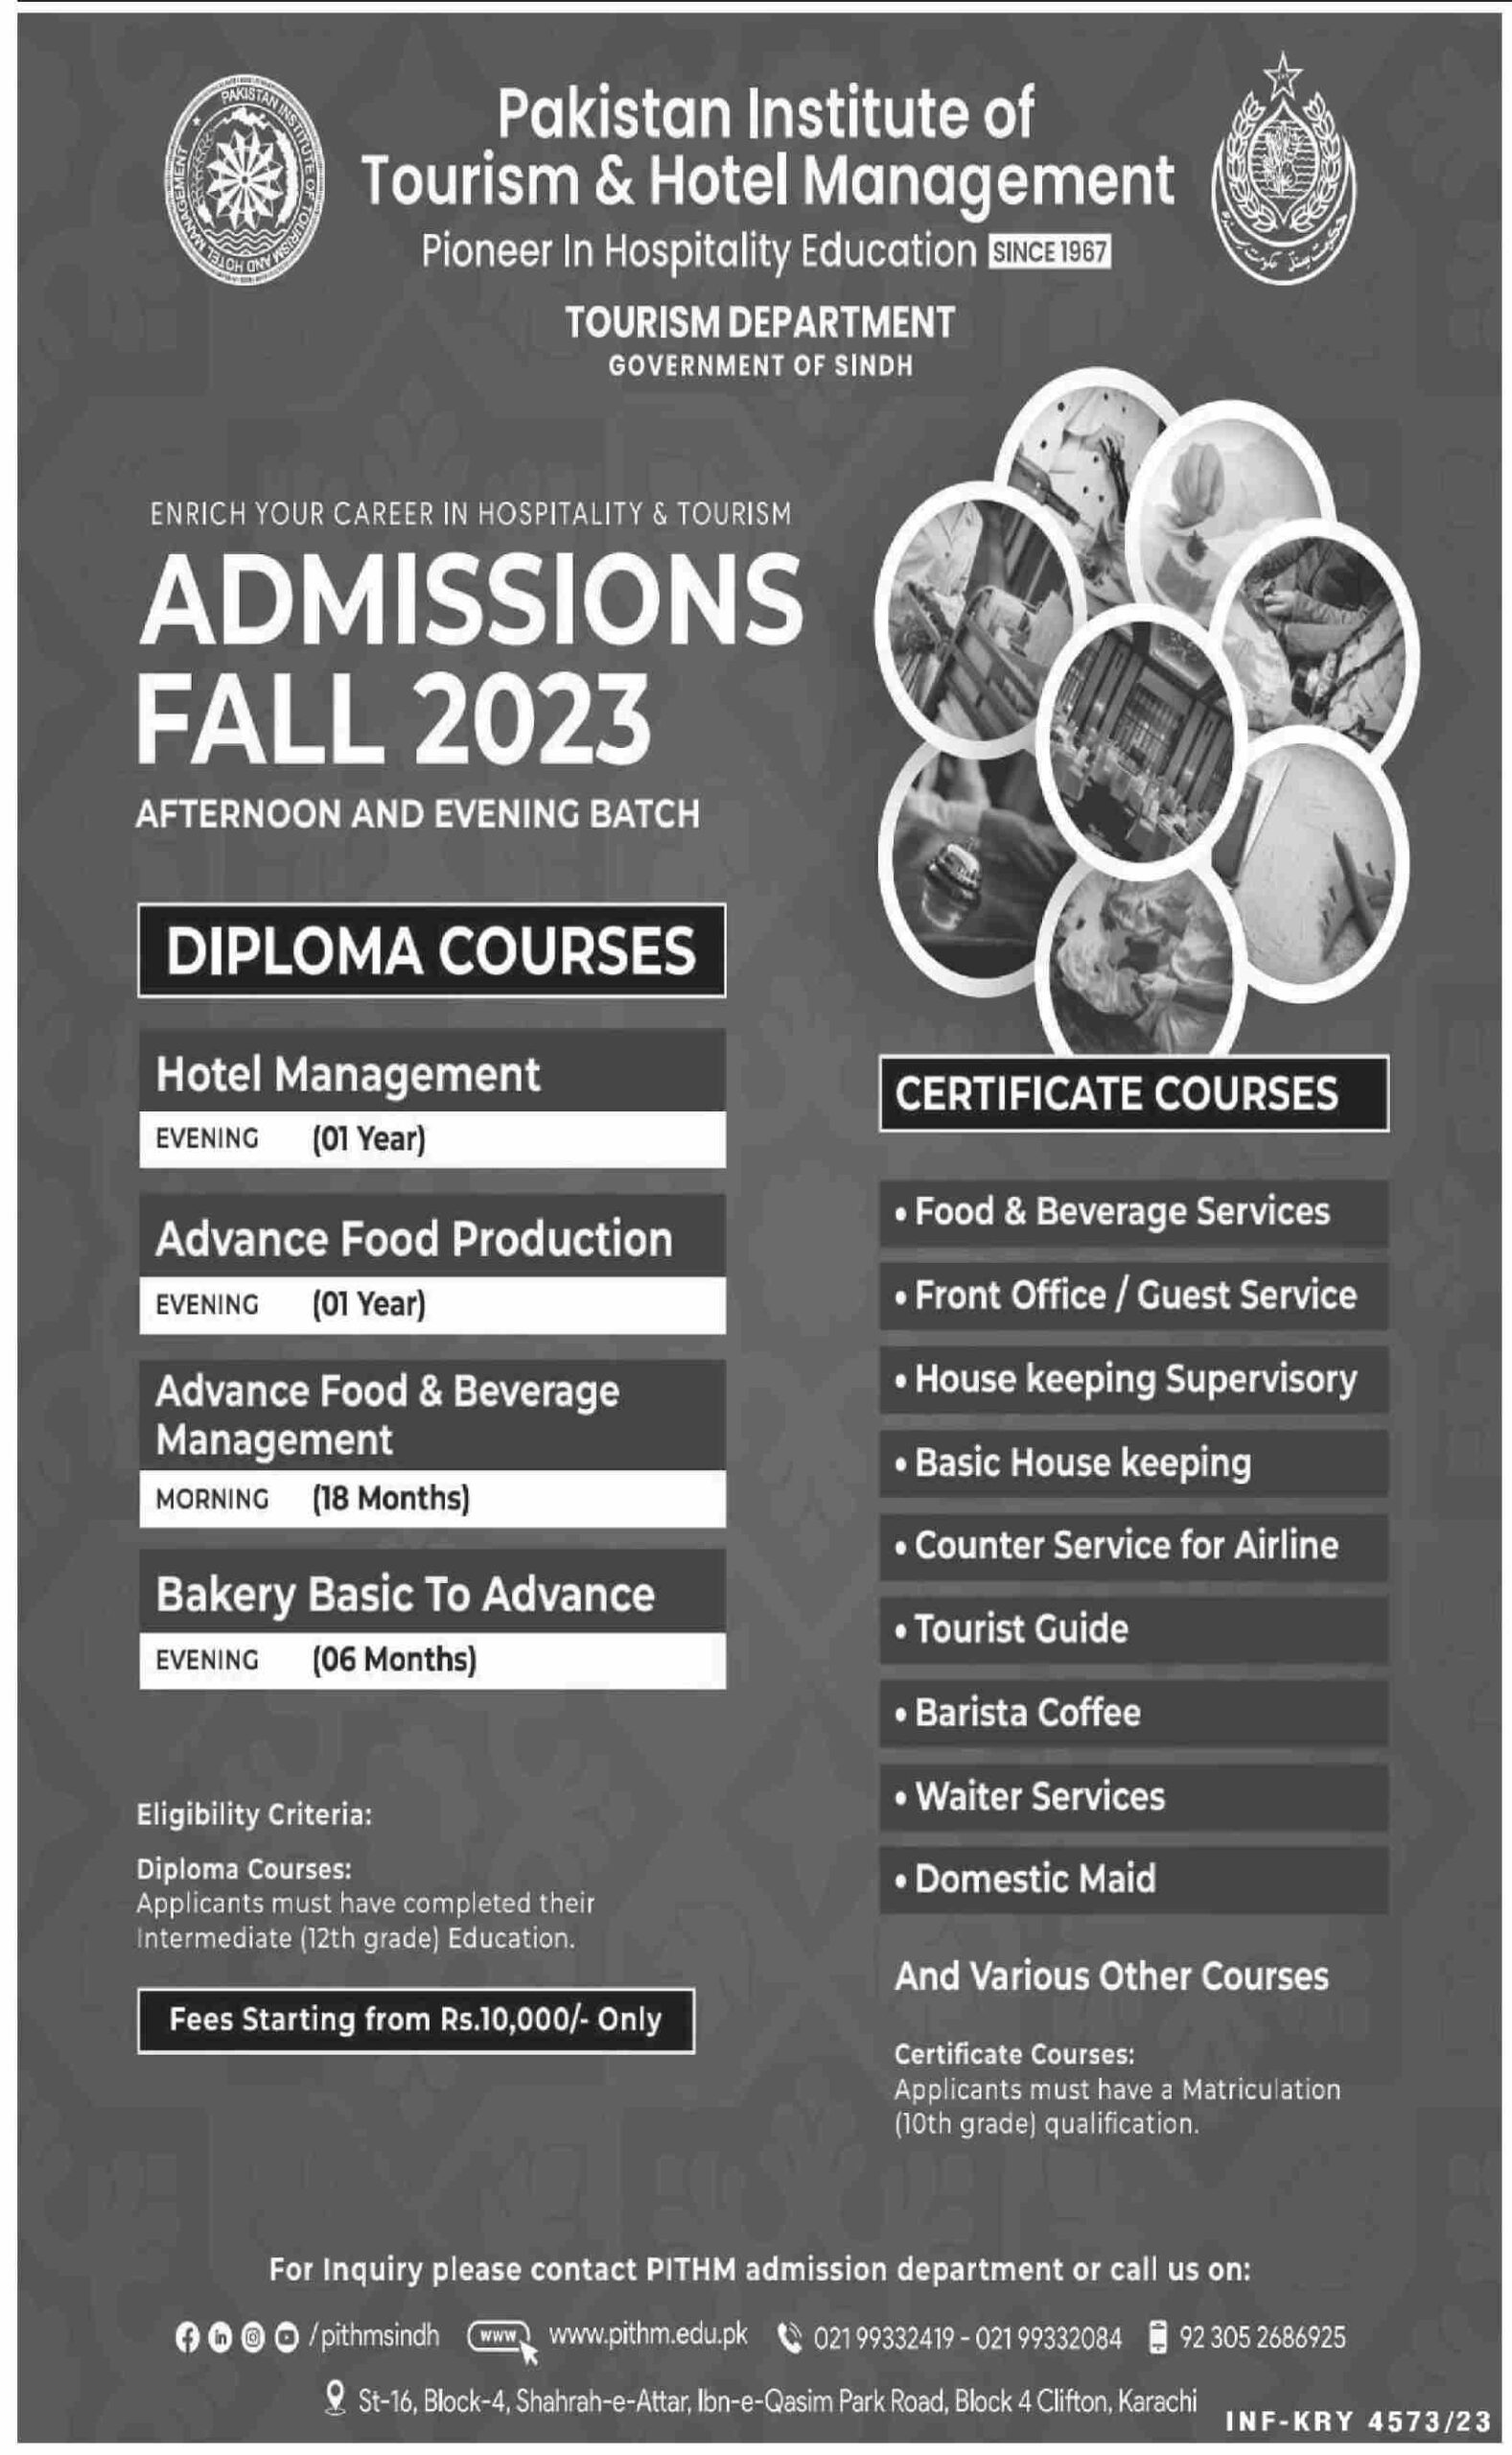 Pakistan Institute of Tourism & Hotel Management Karachi Admissions Fall Afternoon And Evening Batch